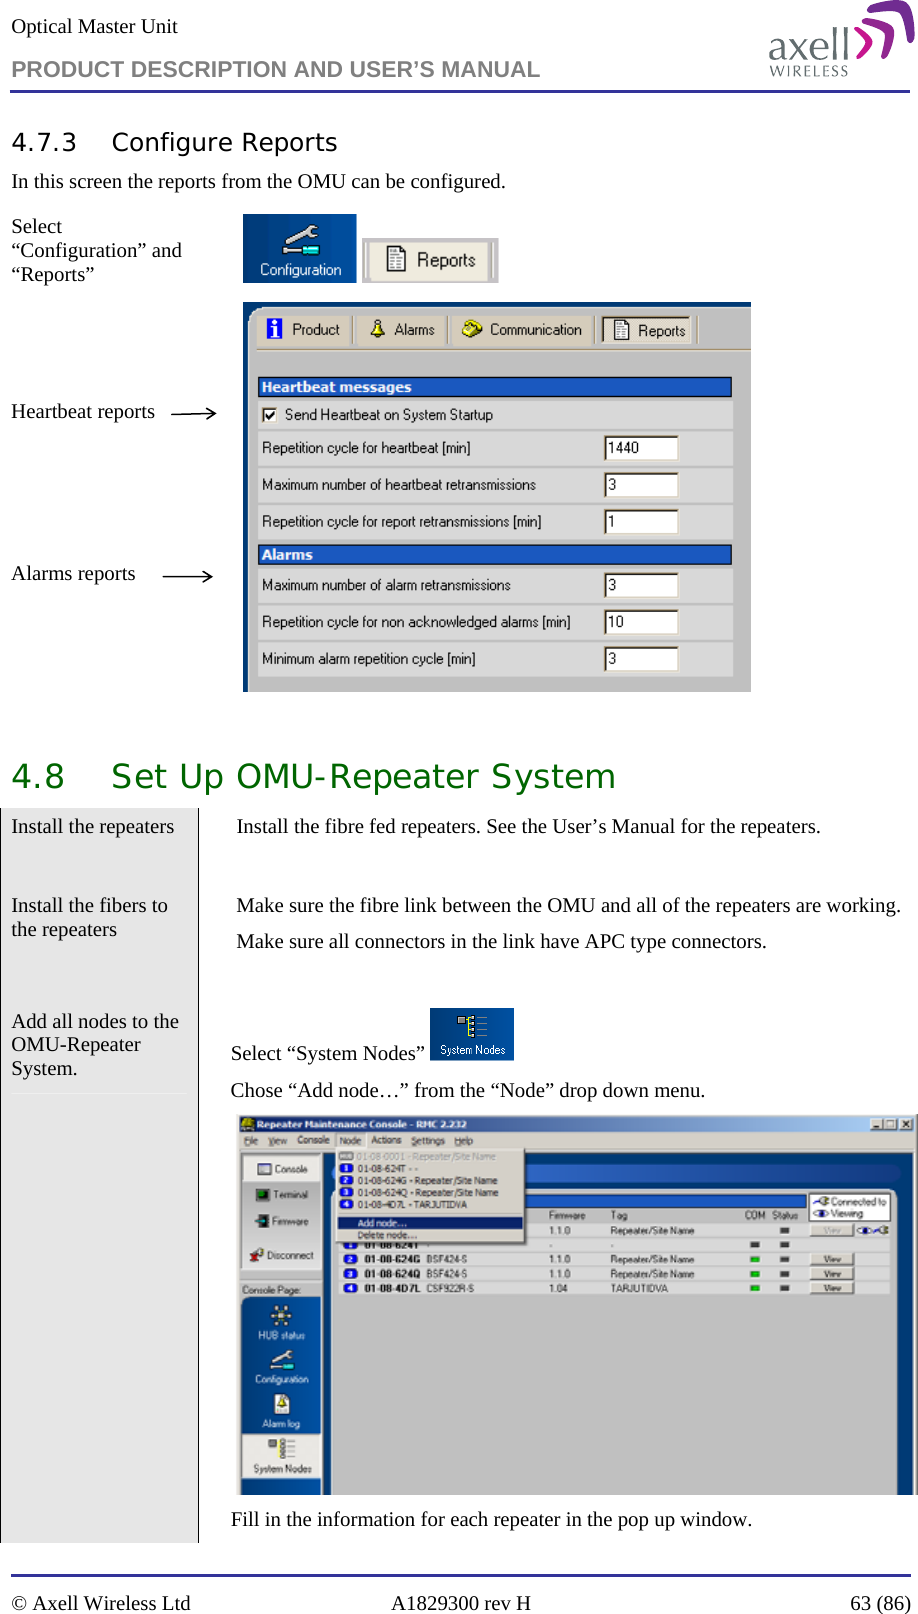 Optical Master Unit PRODUCT DESCRIPTION AND USER’S MANUAL   © Axell Wireless Ltd  A1829300 rev H  63 (86)  4.7.3 Configure Reports In this screen the reports from the OMU can be configured.  Select “Configuration” and “Reports”        Heartbeat reports     Alarms reports     4.8 Set Up OMU-Repeater System Install the repeaters    Install the fibre fed repeaters. See the User’s Manual for the repeaters.  Install the fibers to the repeaters    Make sure the fibre link between the OMU and all of the repeaters are working. Make sure all connectors in the link have APC type connectors.  Add all nodes to the OMU-Repeater System.   Select “System Nodes”   Chose “Add node…” from the “Node” drop down menu.   Fill in the information for each repeater in the pop up window. 